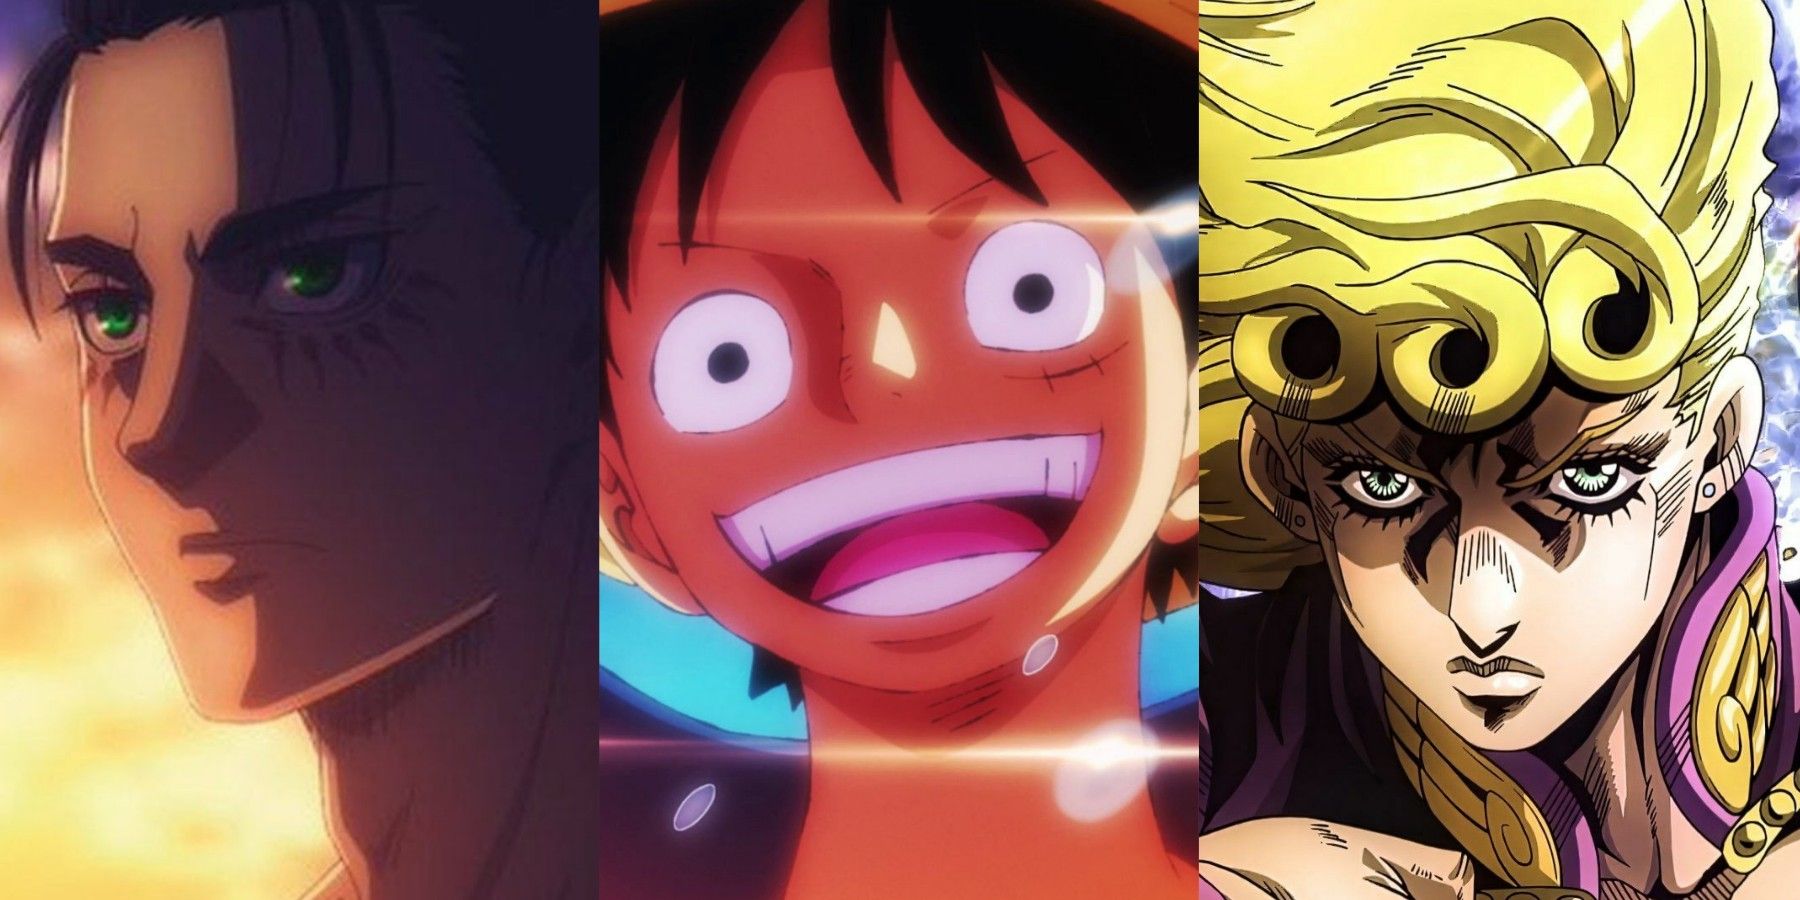 The 10 Coolest Anime Power Systems Ranked